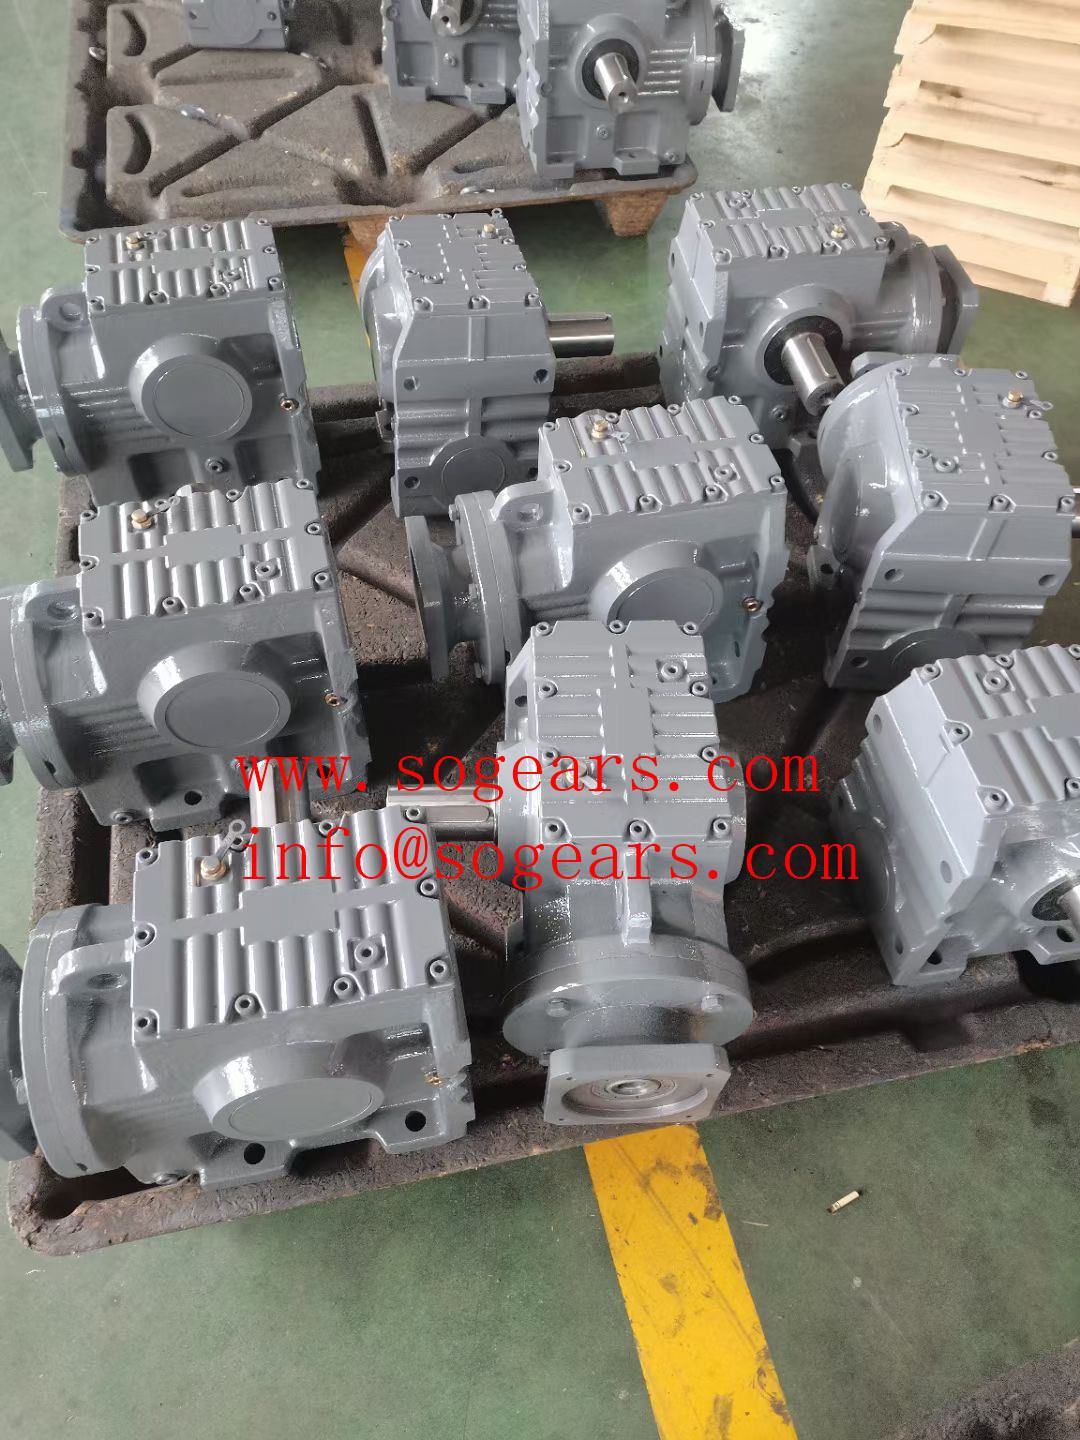  Hollow shaft right angle gearbox